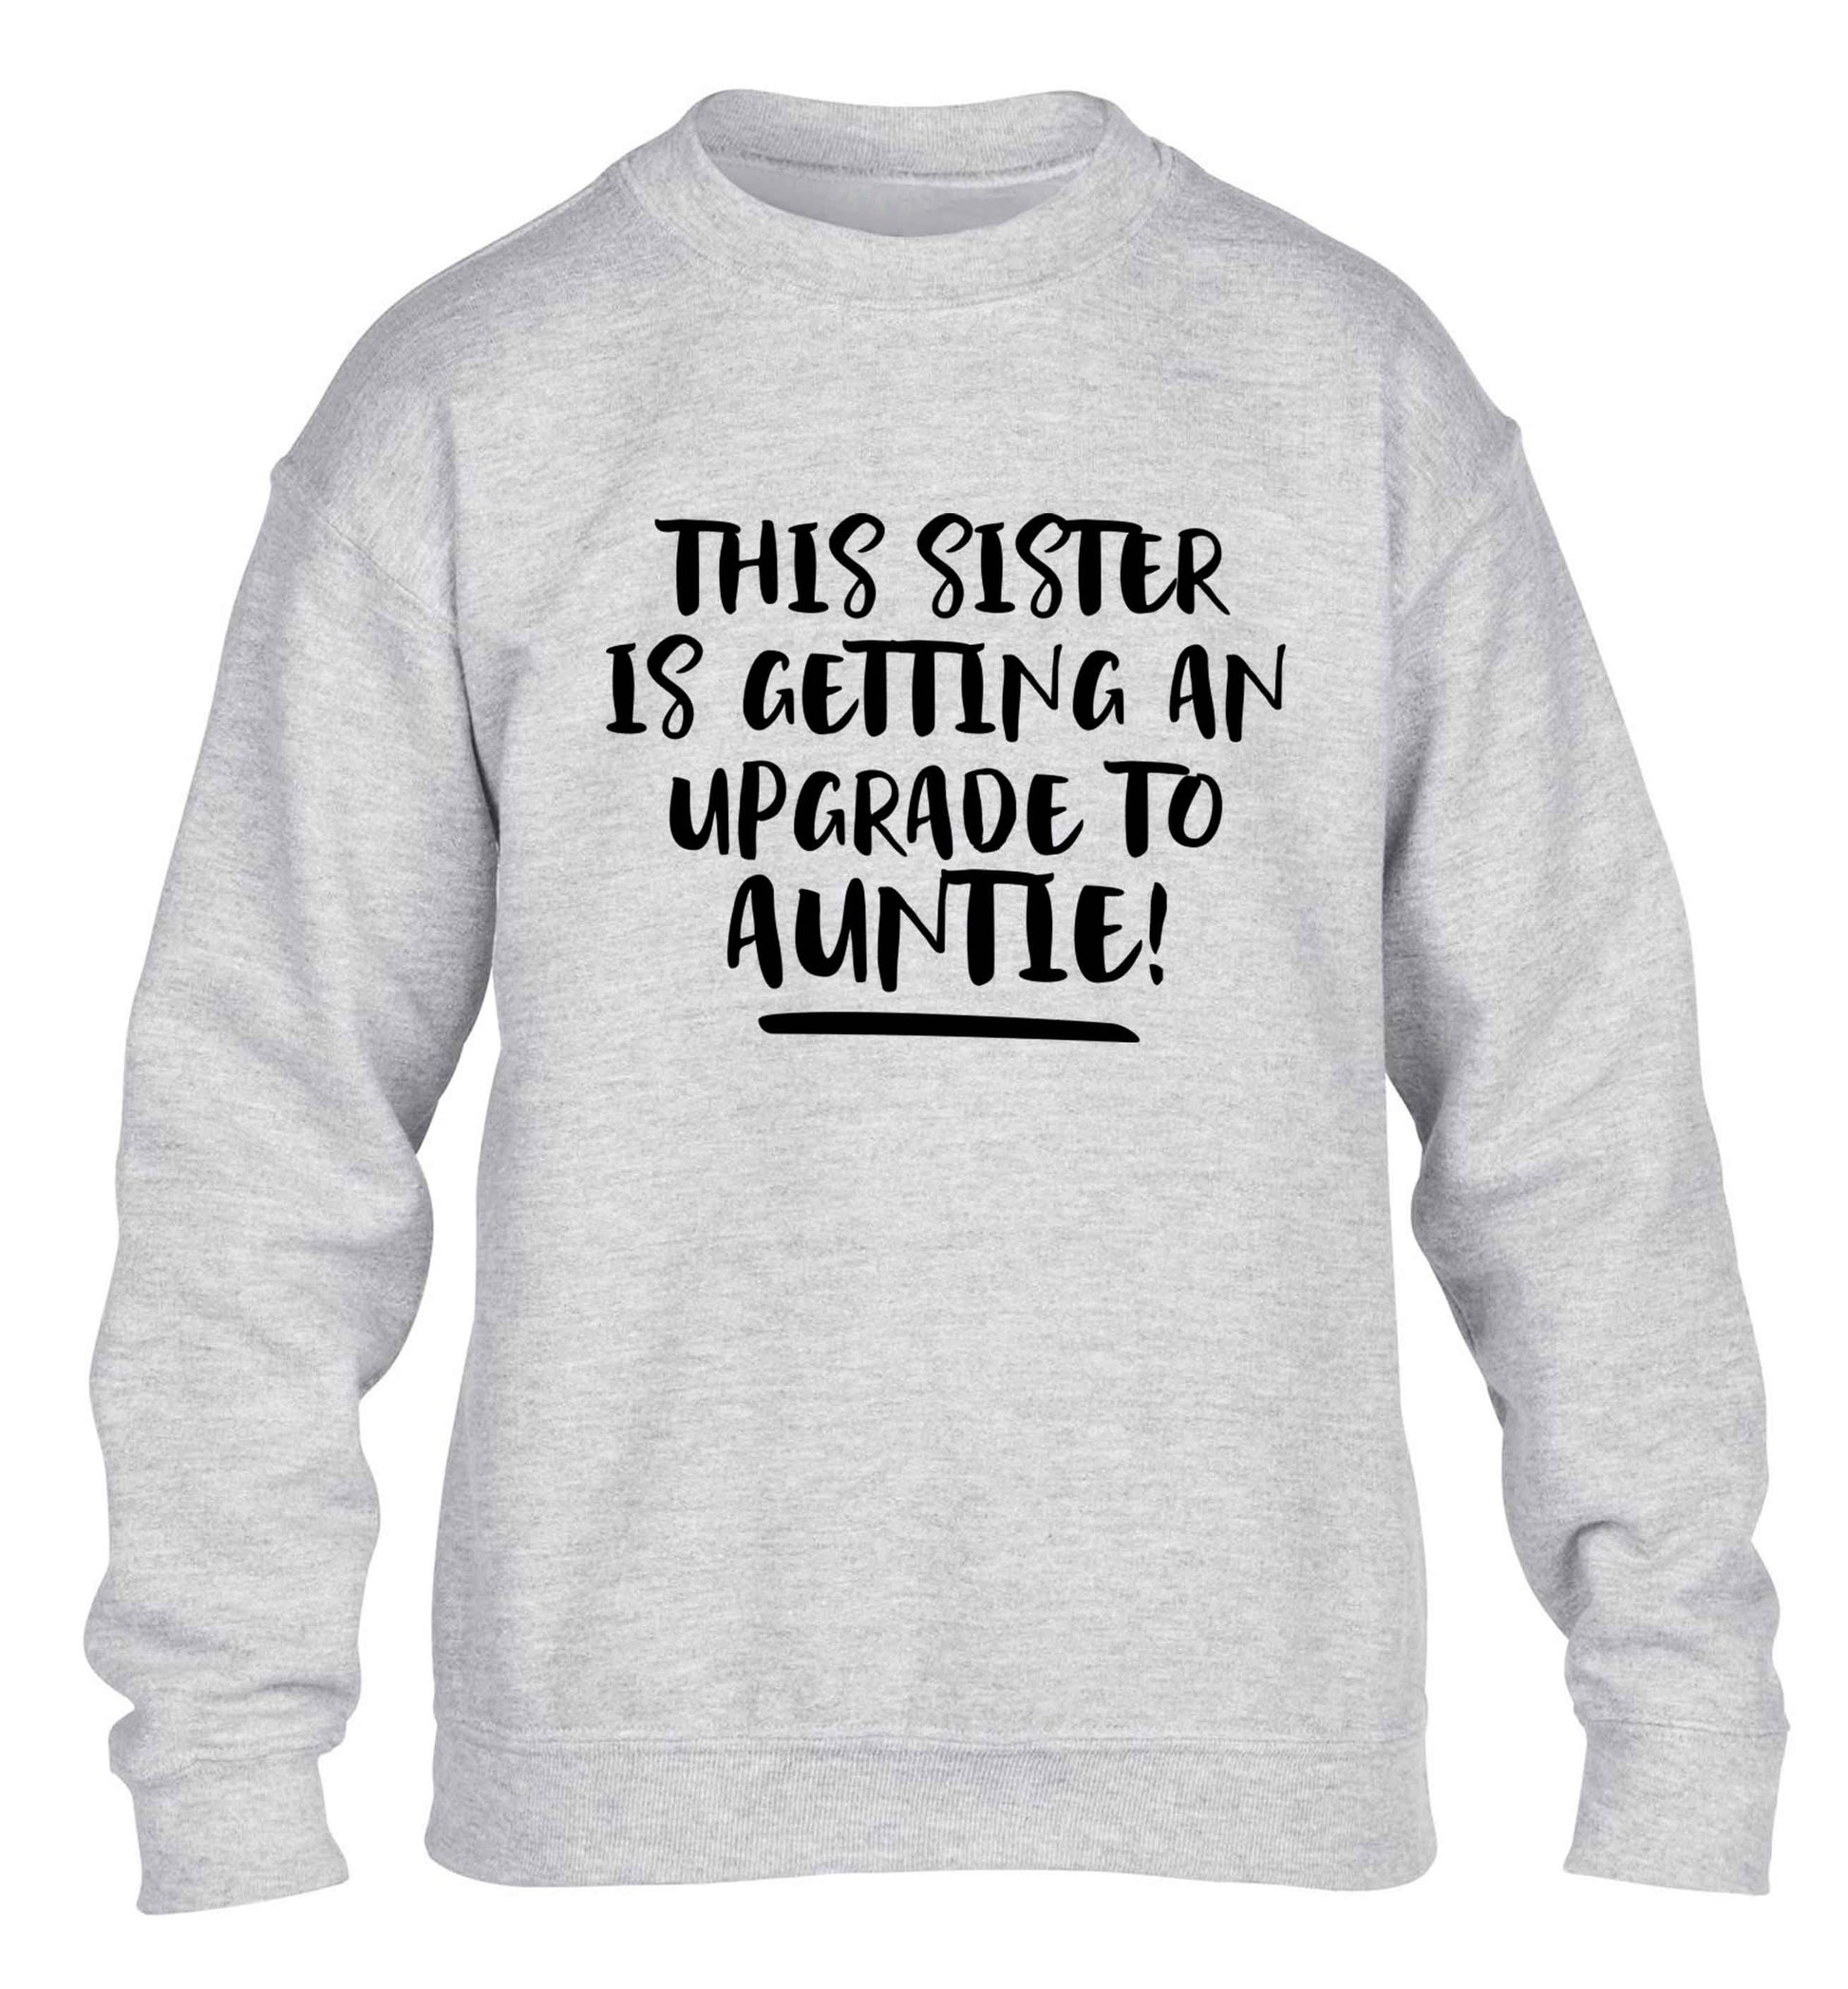 This sister is getting an upgrade to auntie! children's grey sweater 12-13 Years